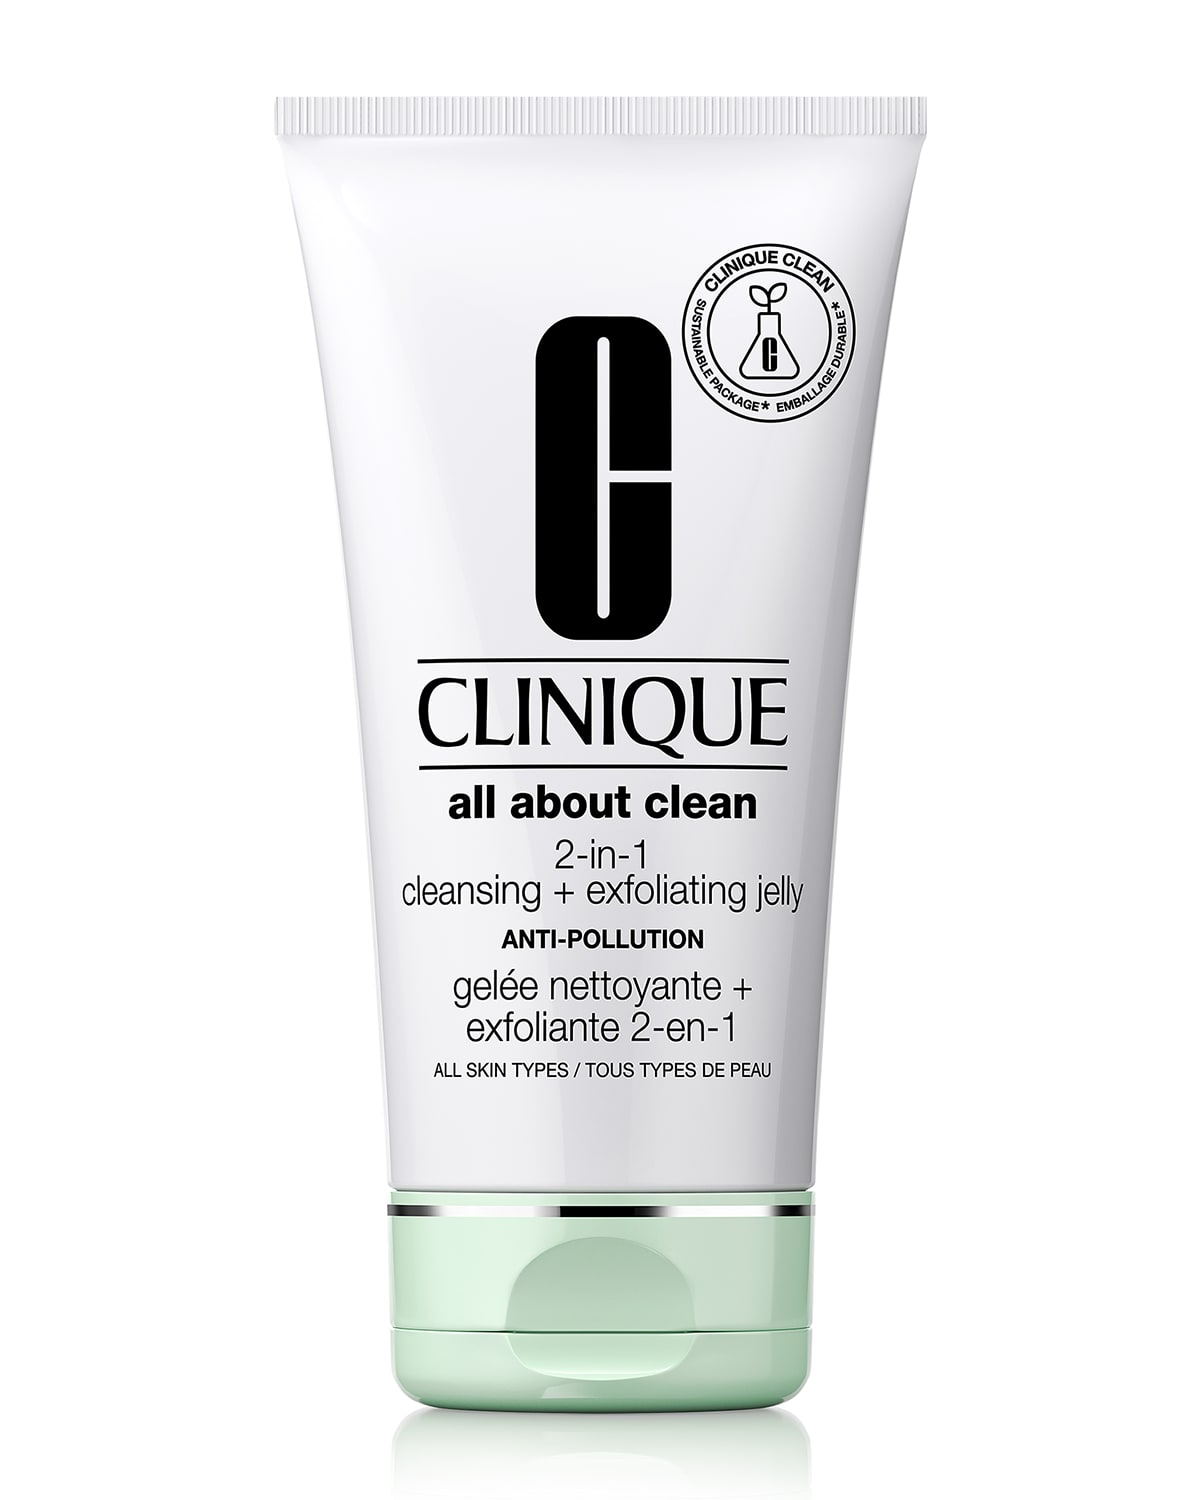 All About Clean 2-in-1 Cleansing + Exfoliating Jelly